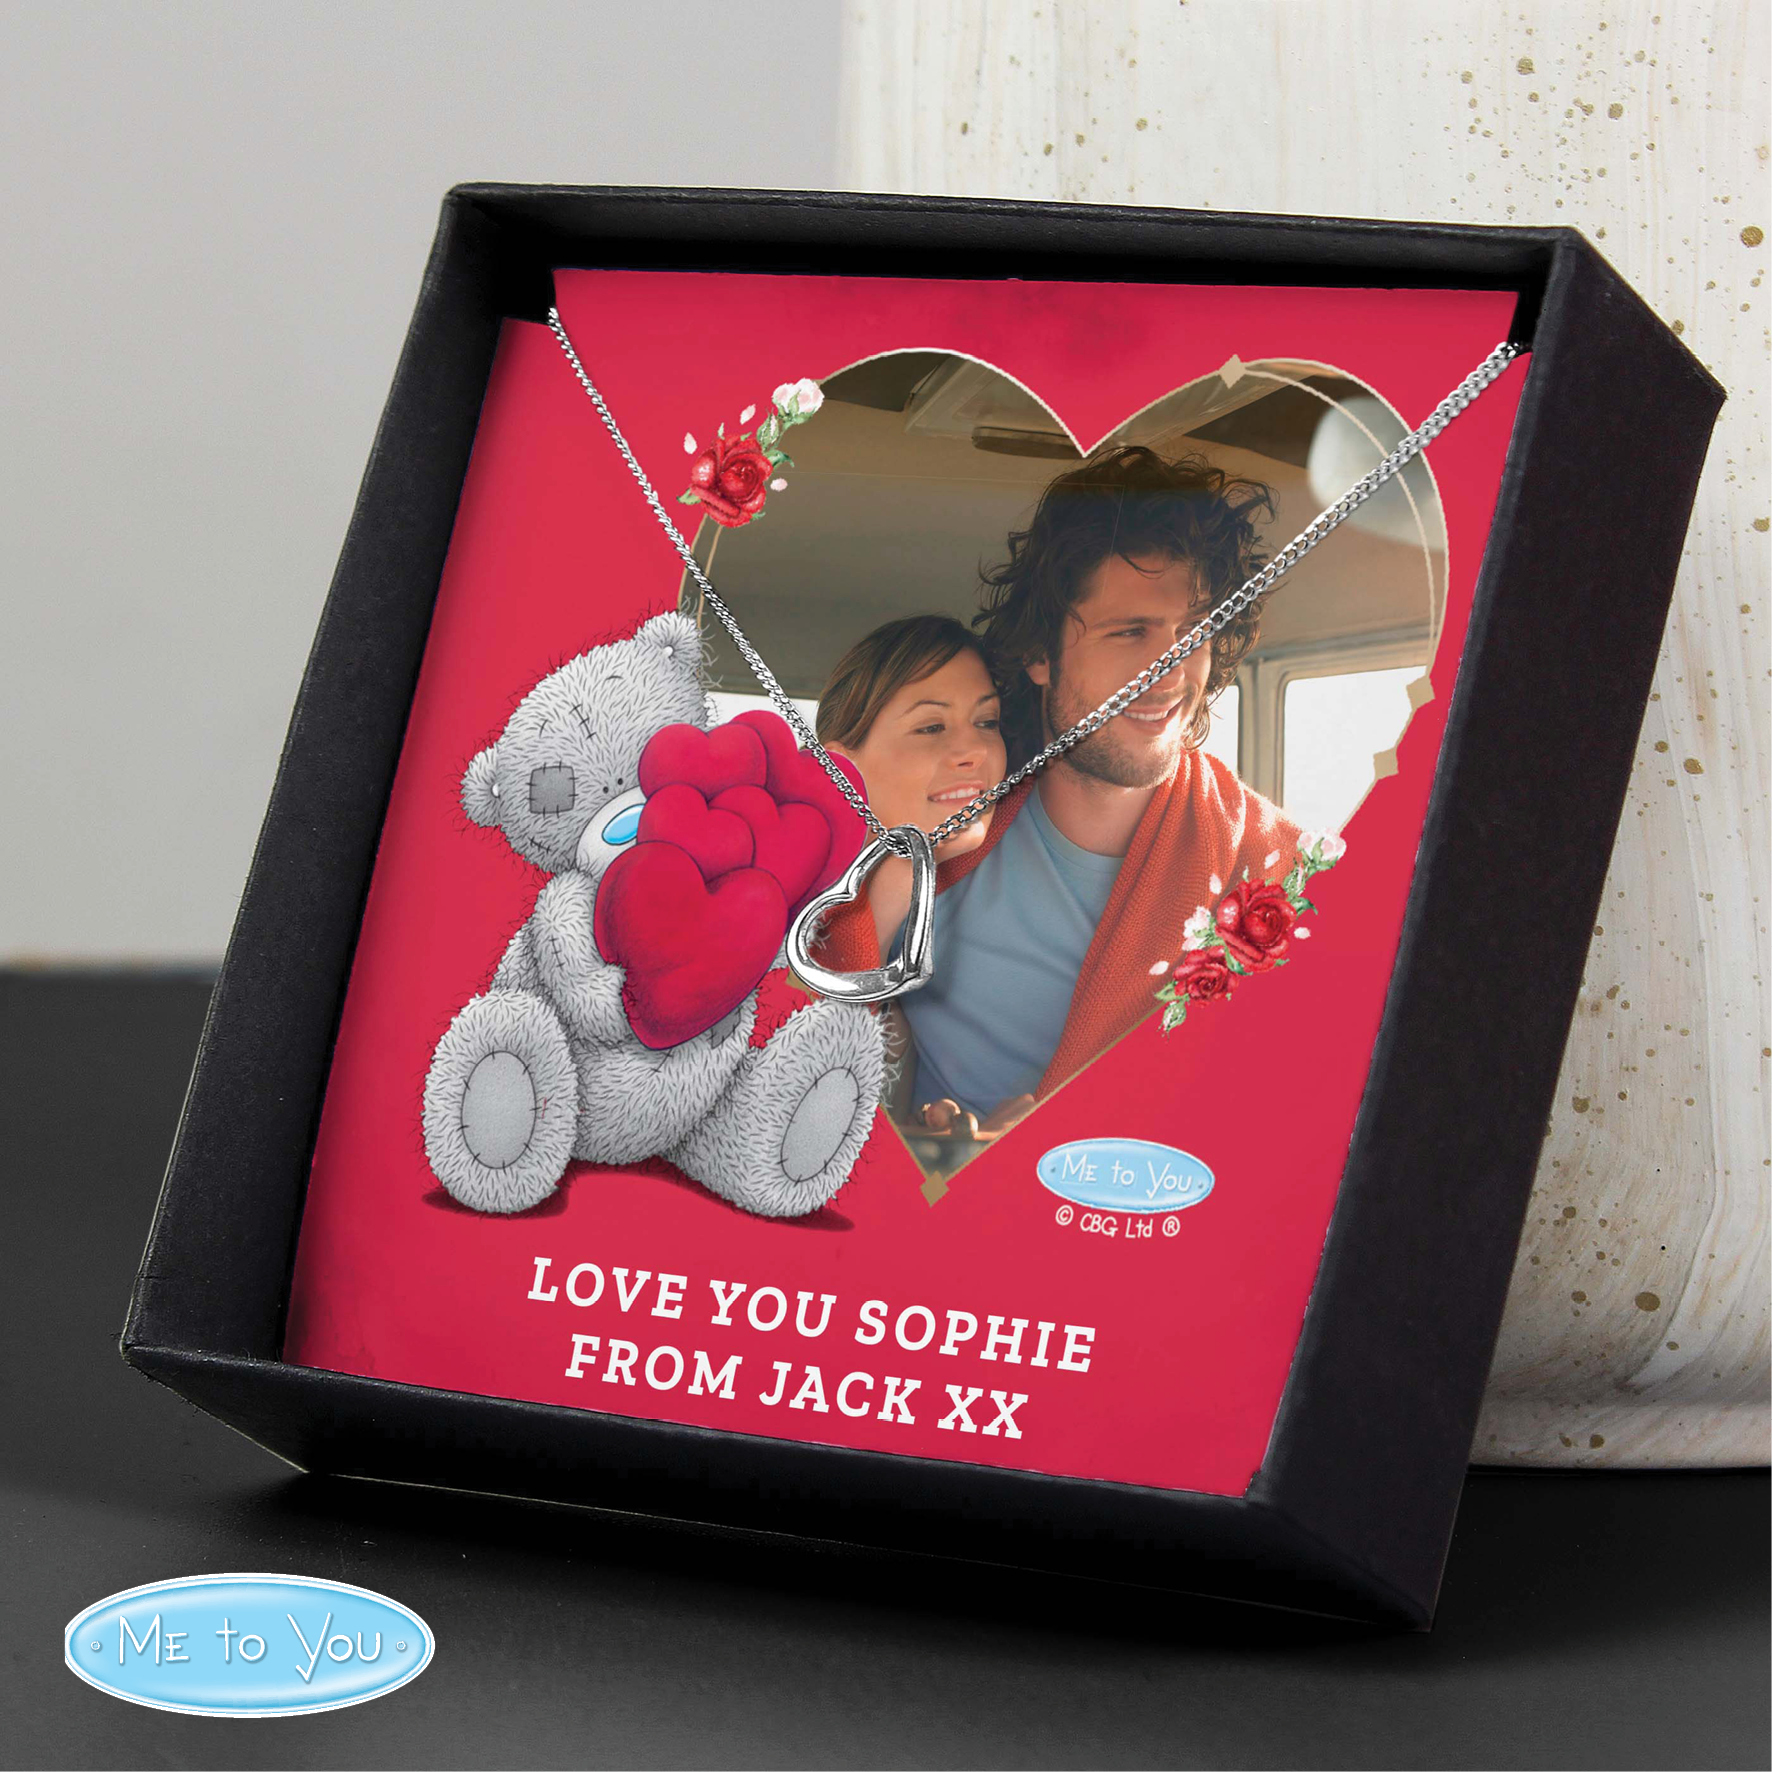 Personalised Gifts | Present & Gift Ideas | Getting Personal